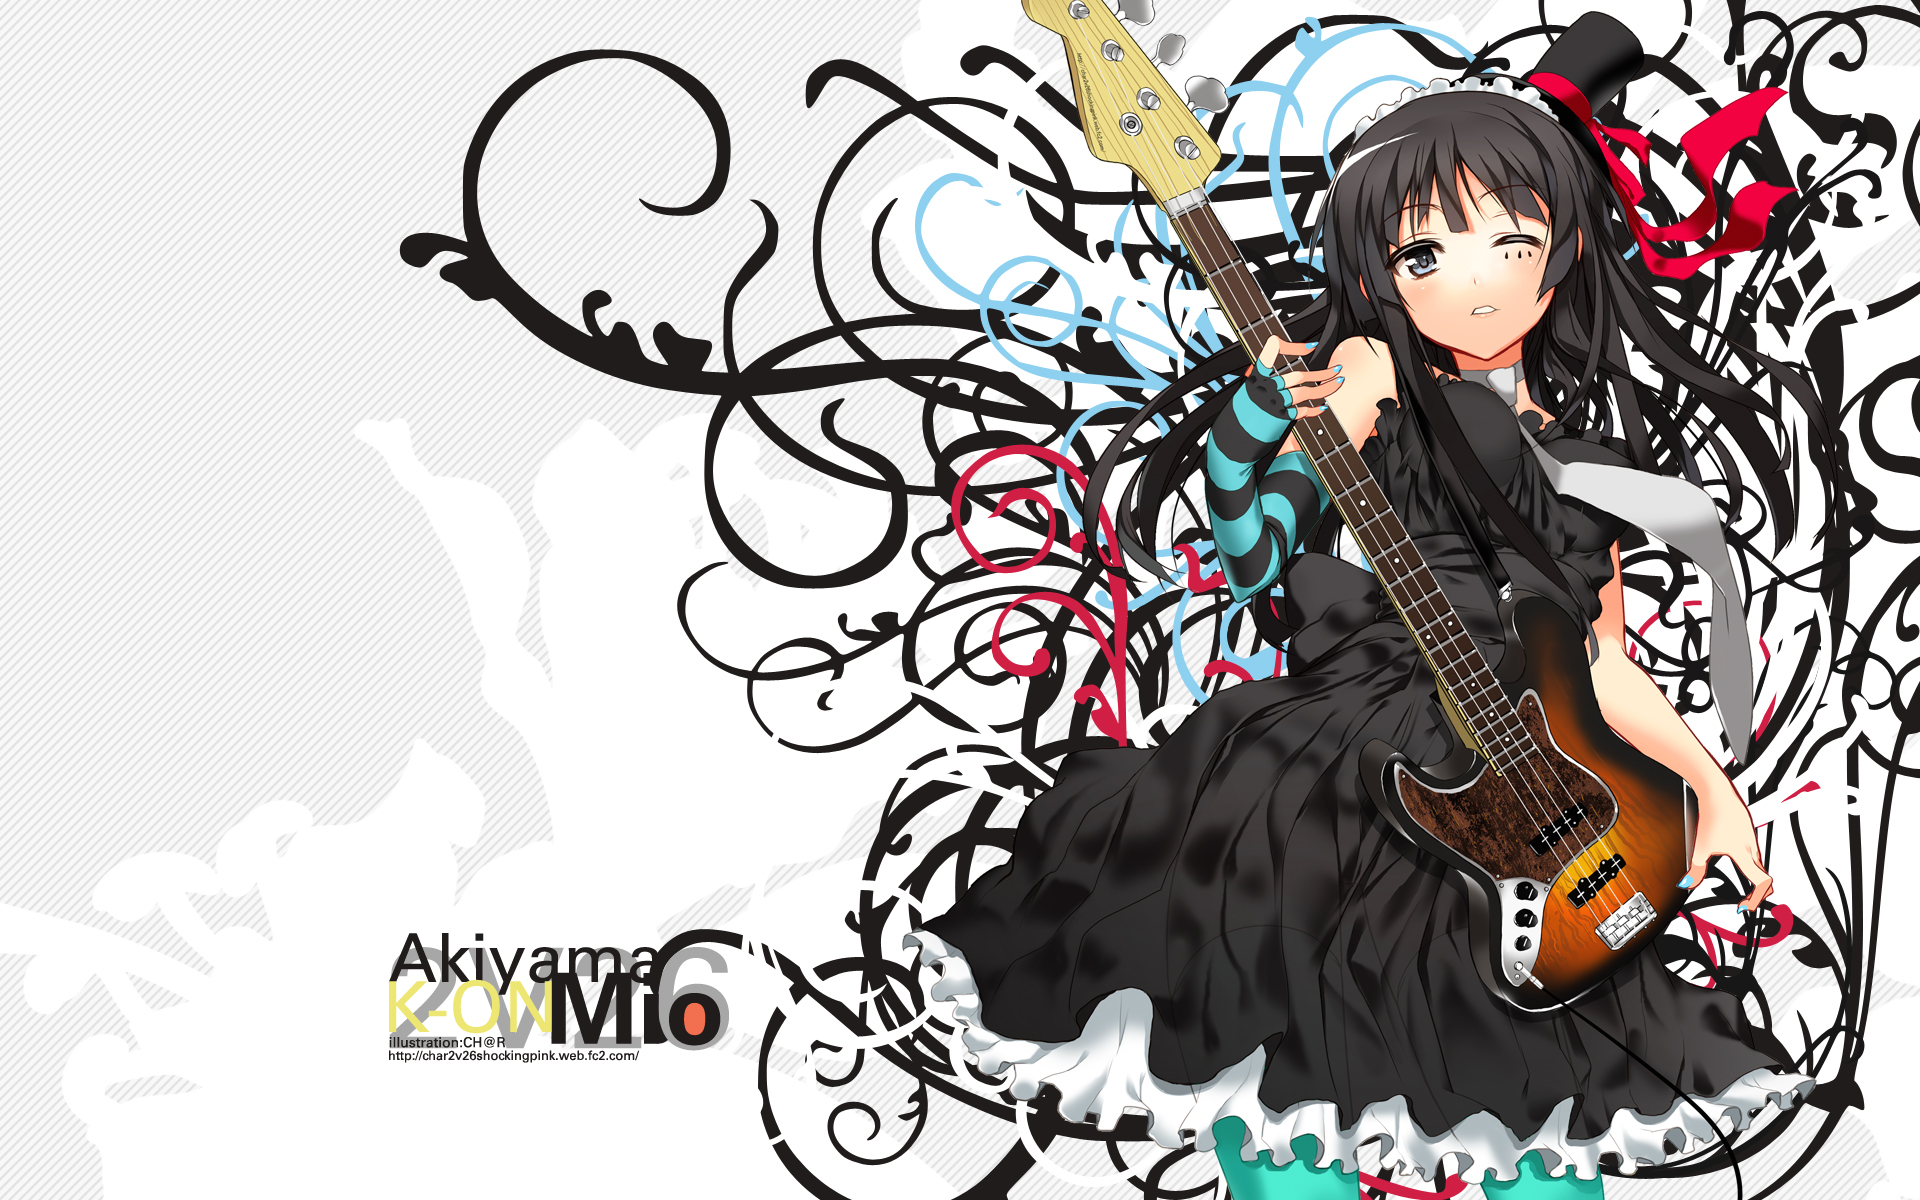 Anime Girls With Guitar - HD Wallpaper 